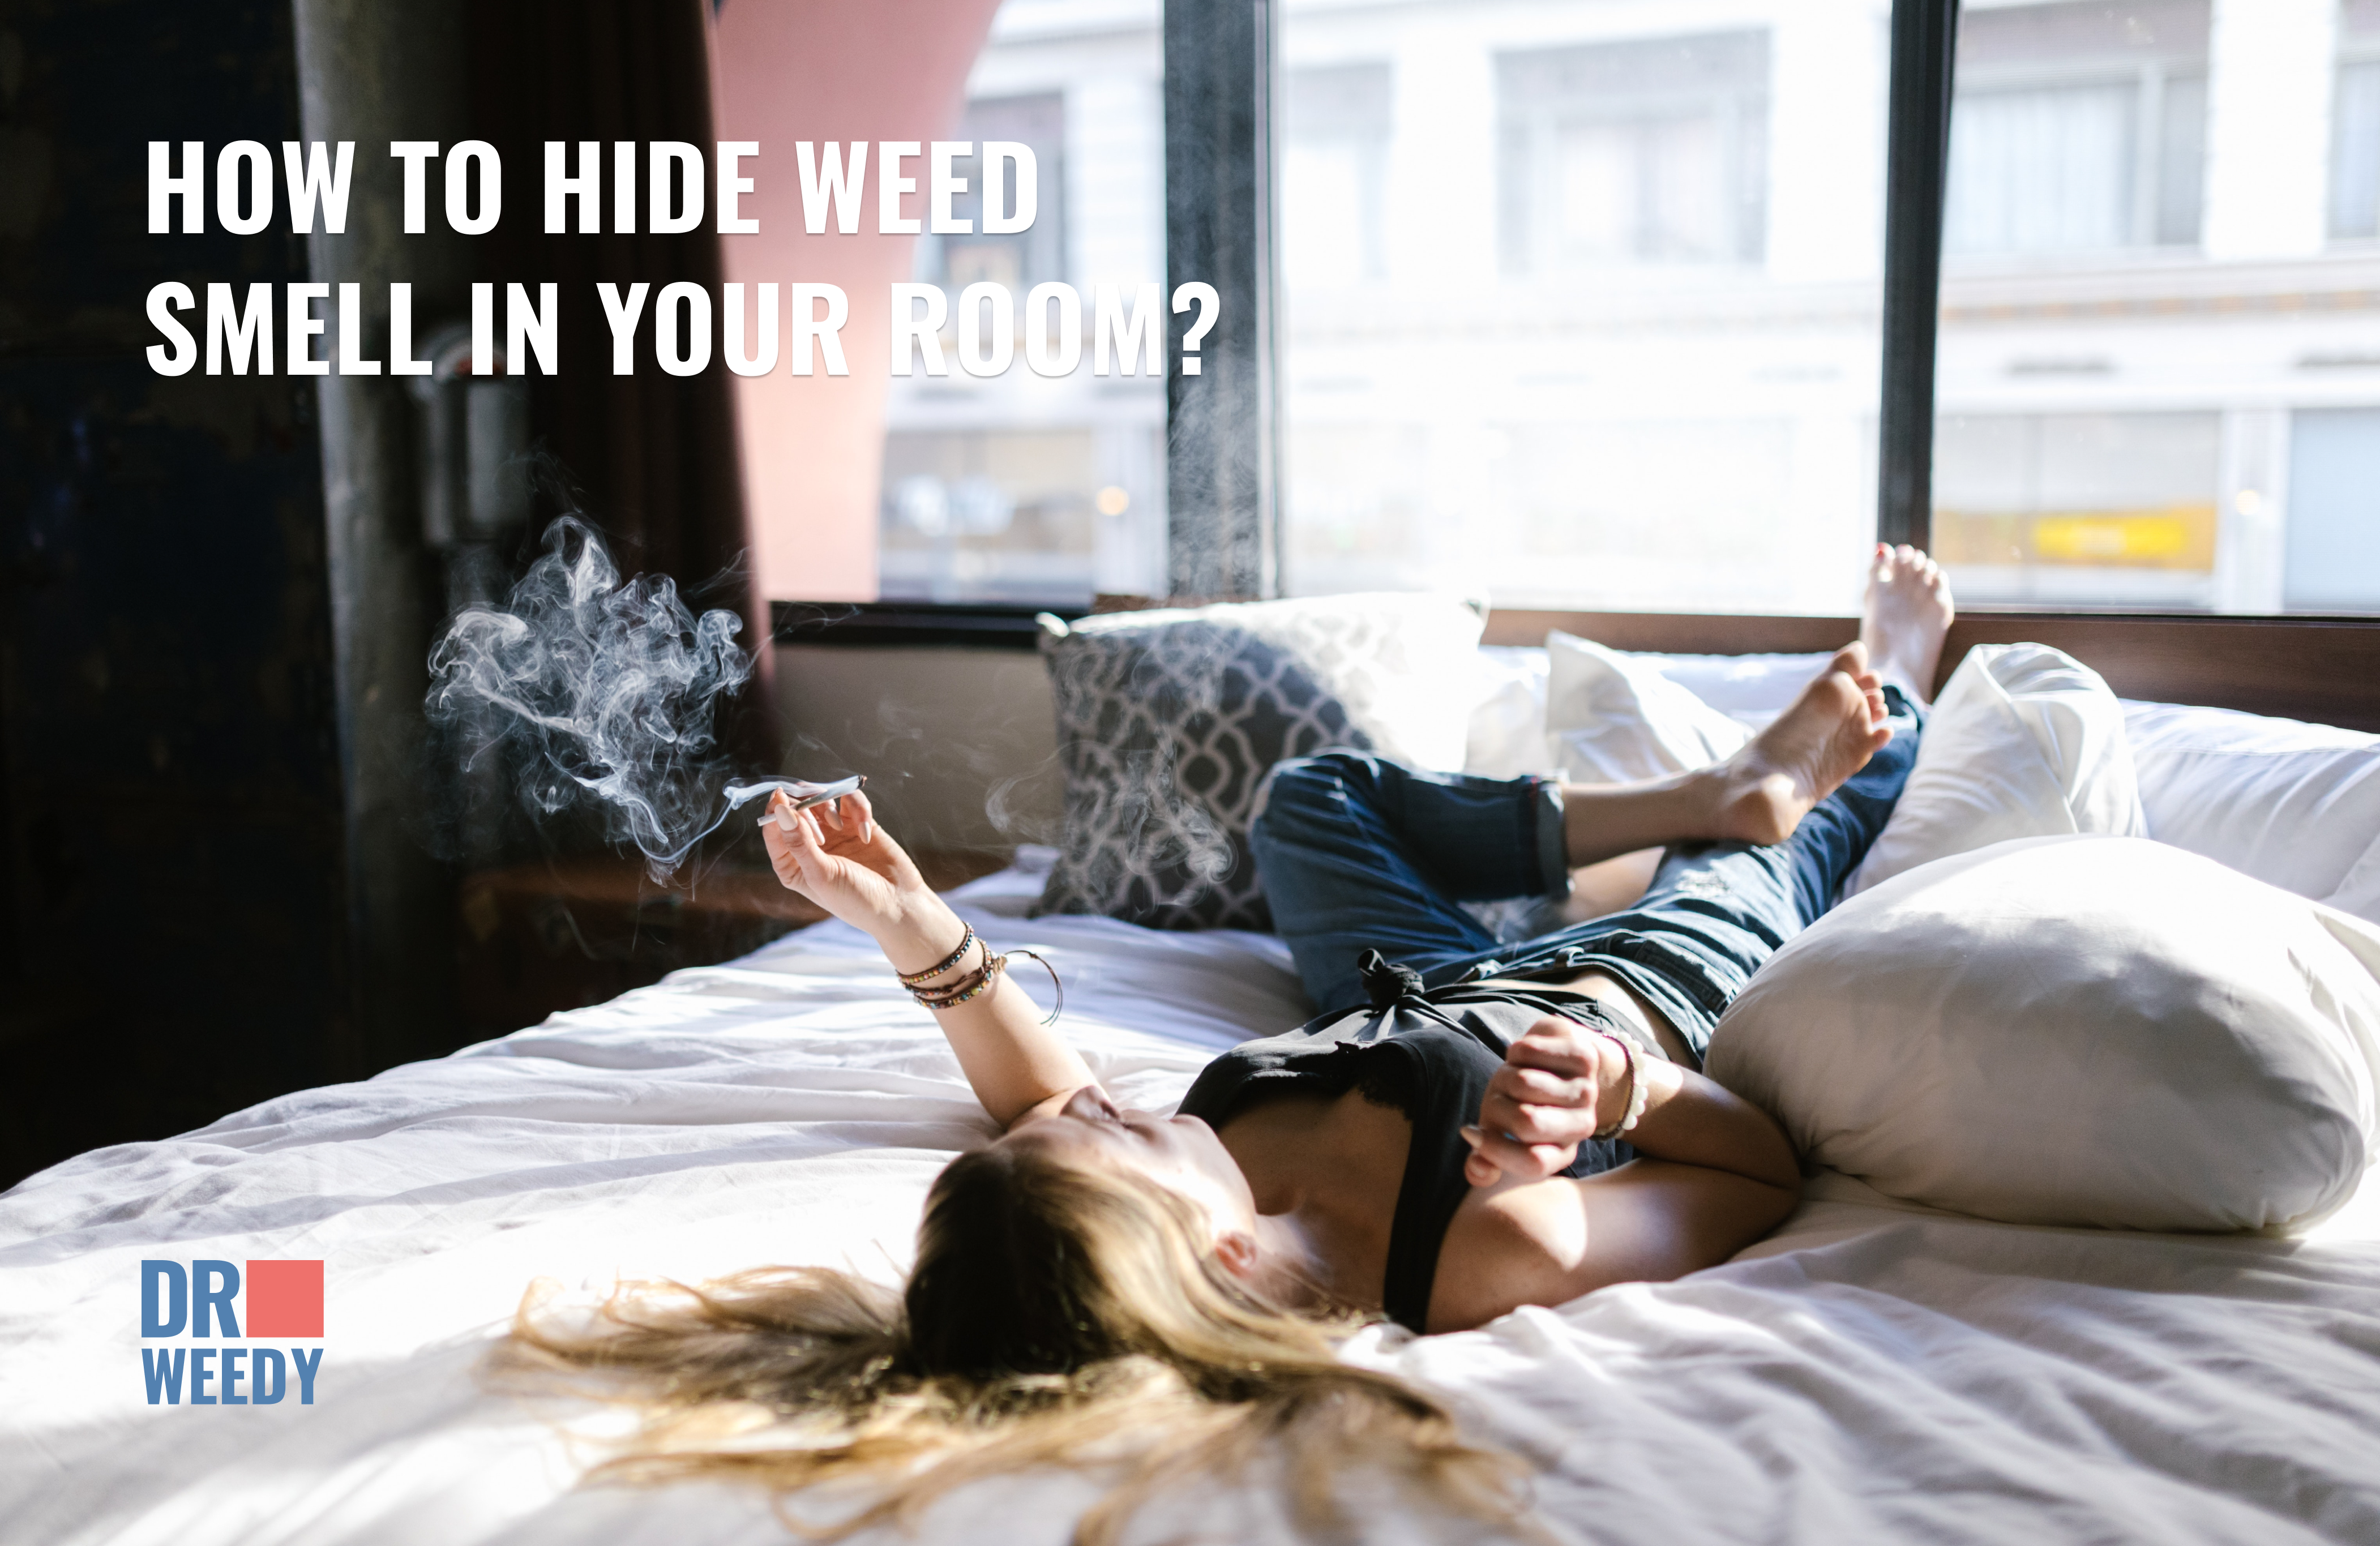 How To Hide Weed Smell In Your Room?